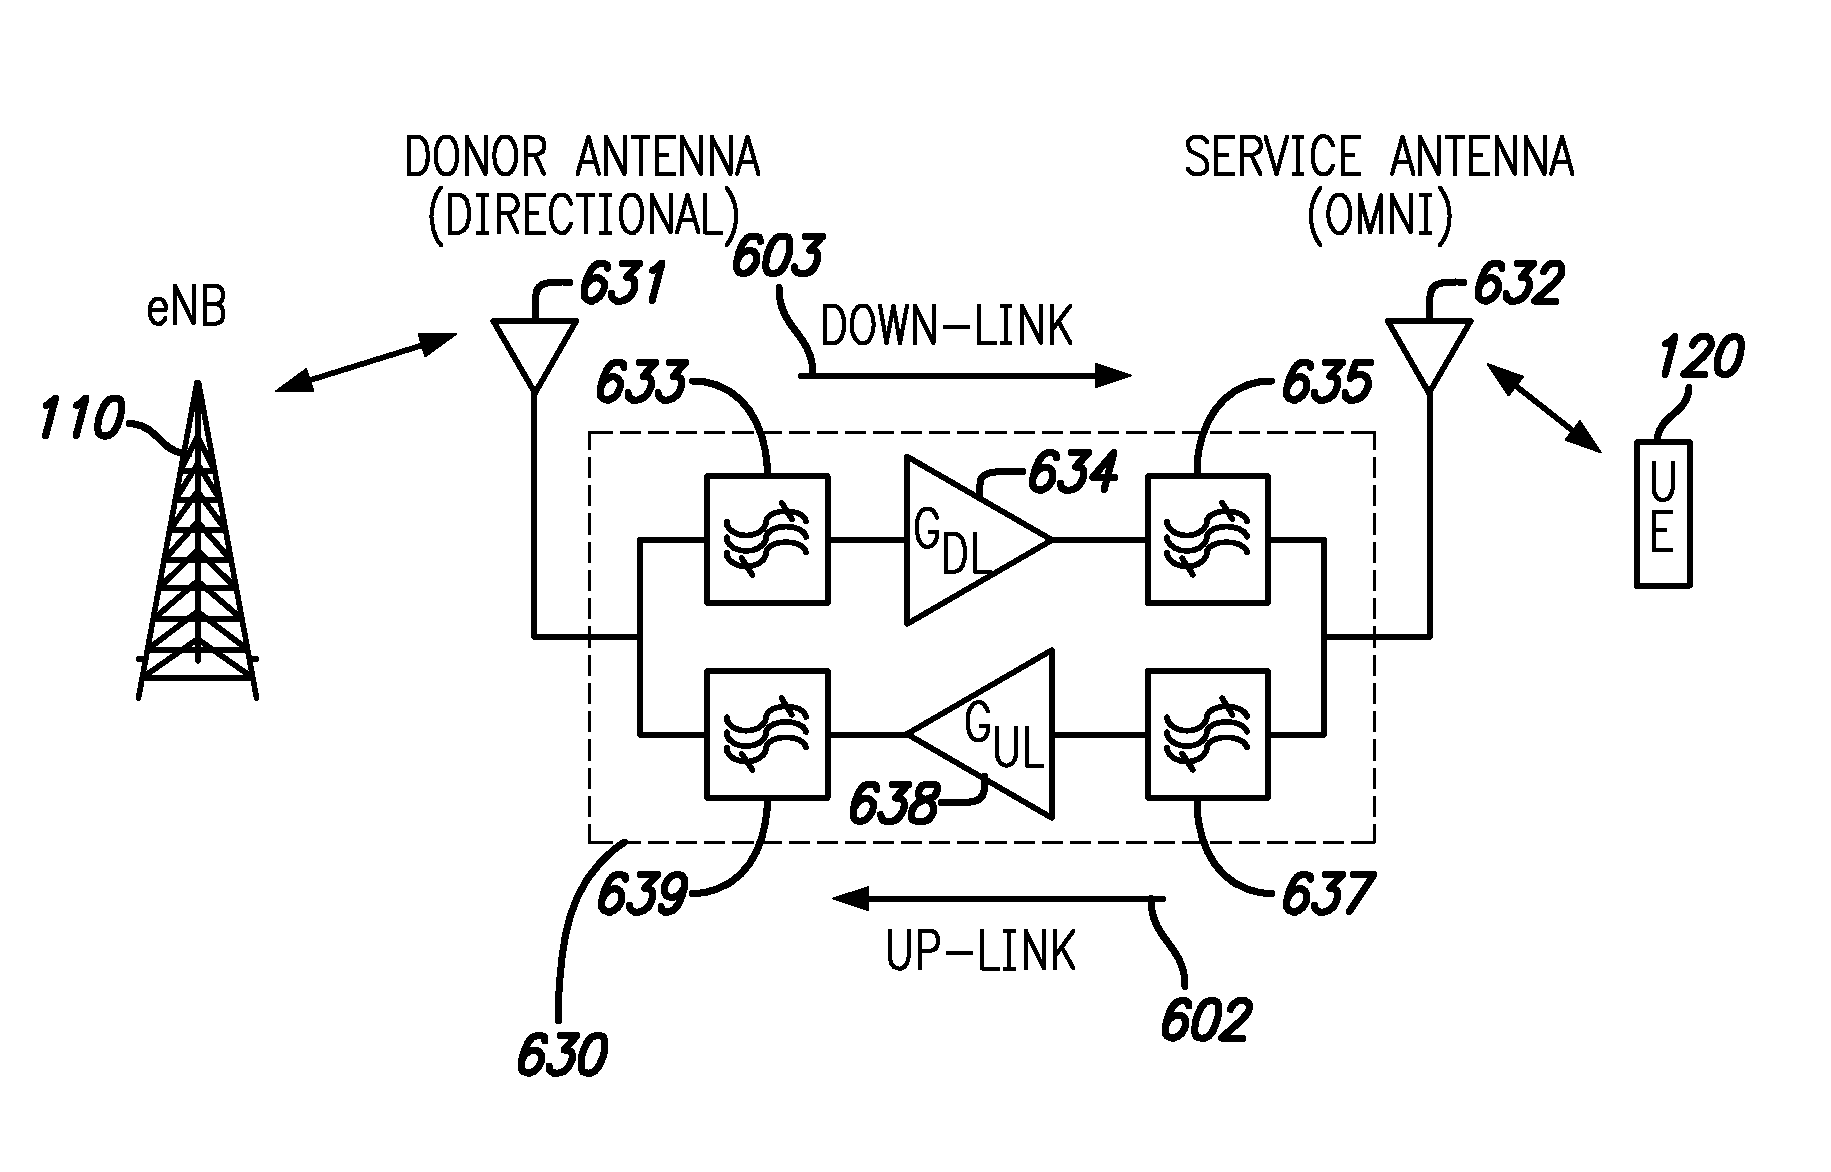 Data throughput for cell-edge users in a LTE network using down-link repeaters and up link HARQ relays